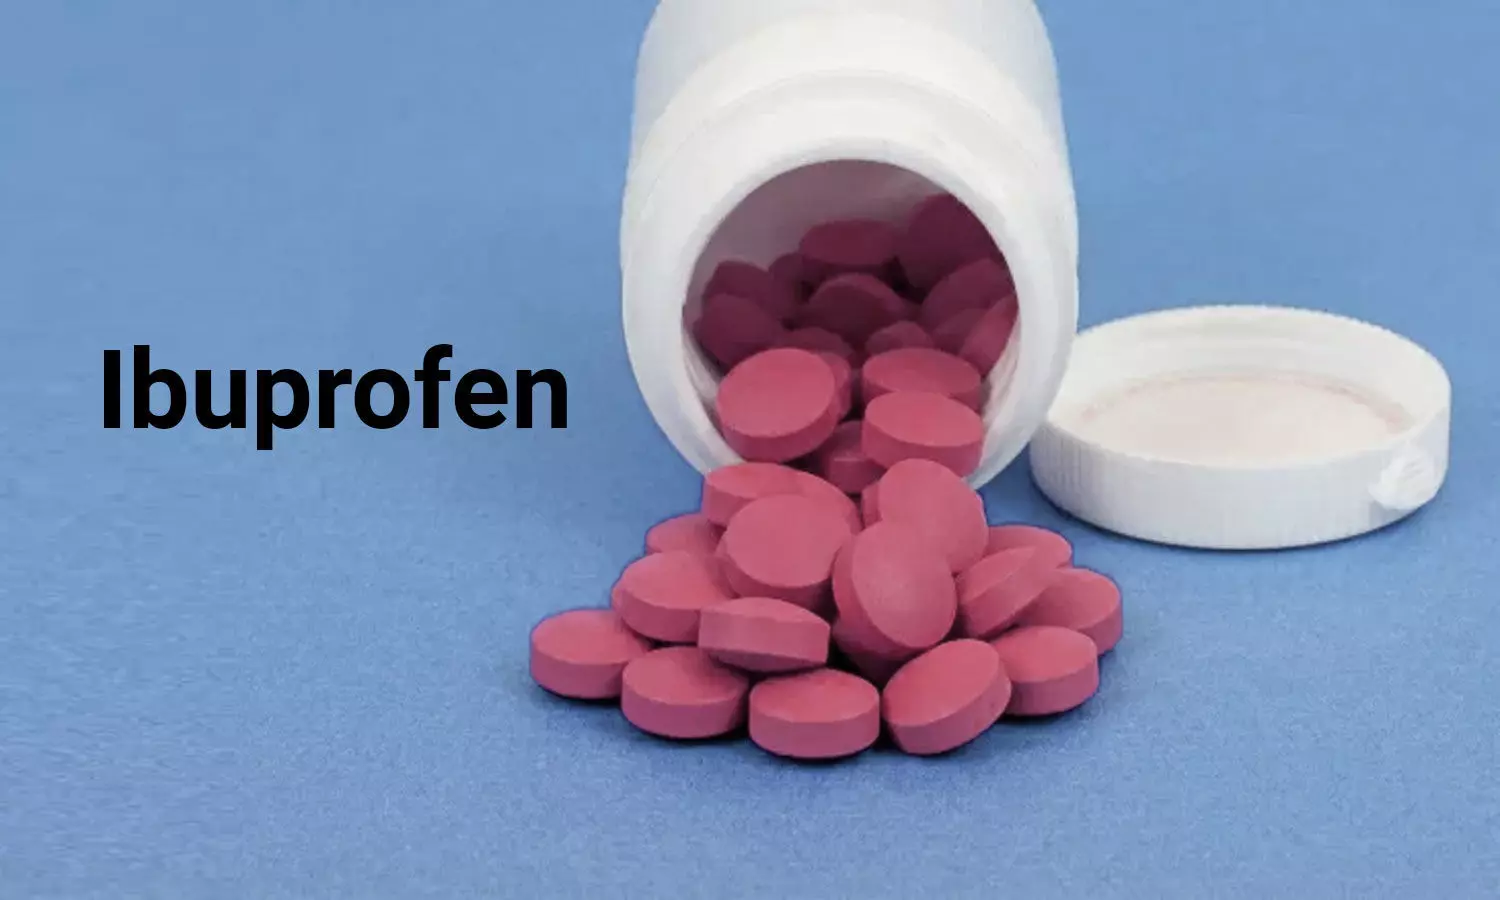 Ibuprofen reduces pain in children undergoing primary tooth extraction, Study says